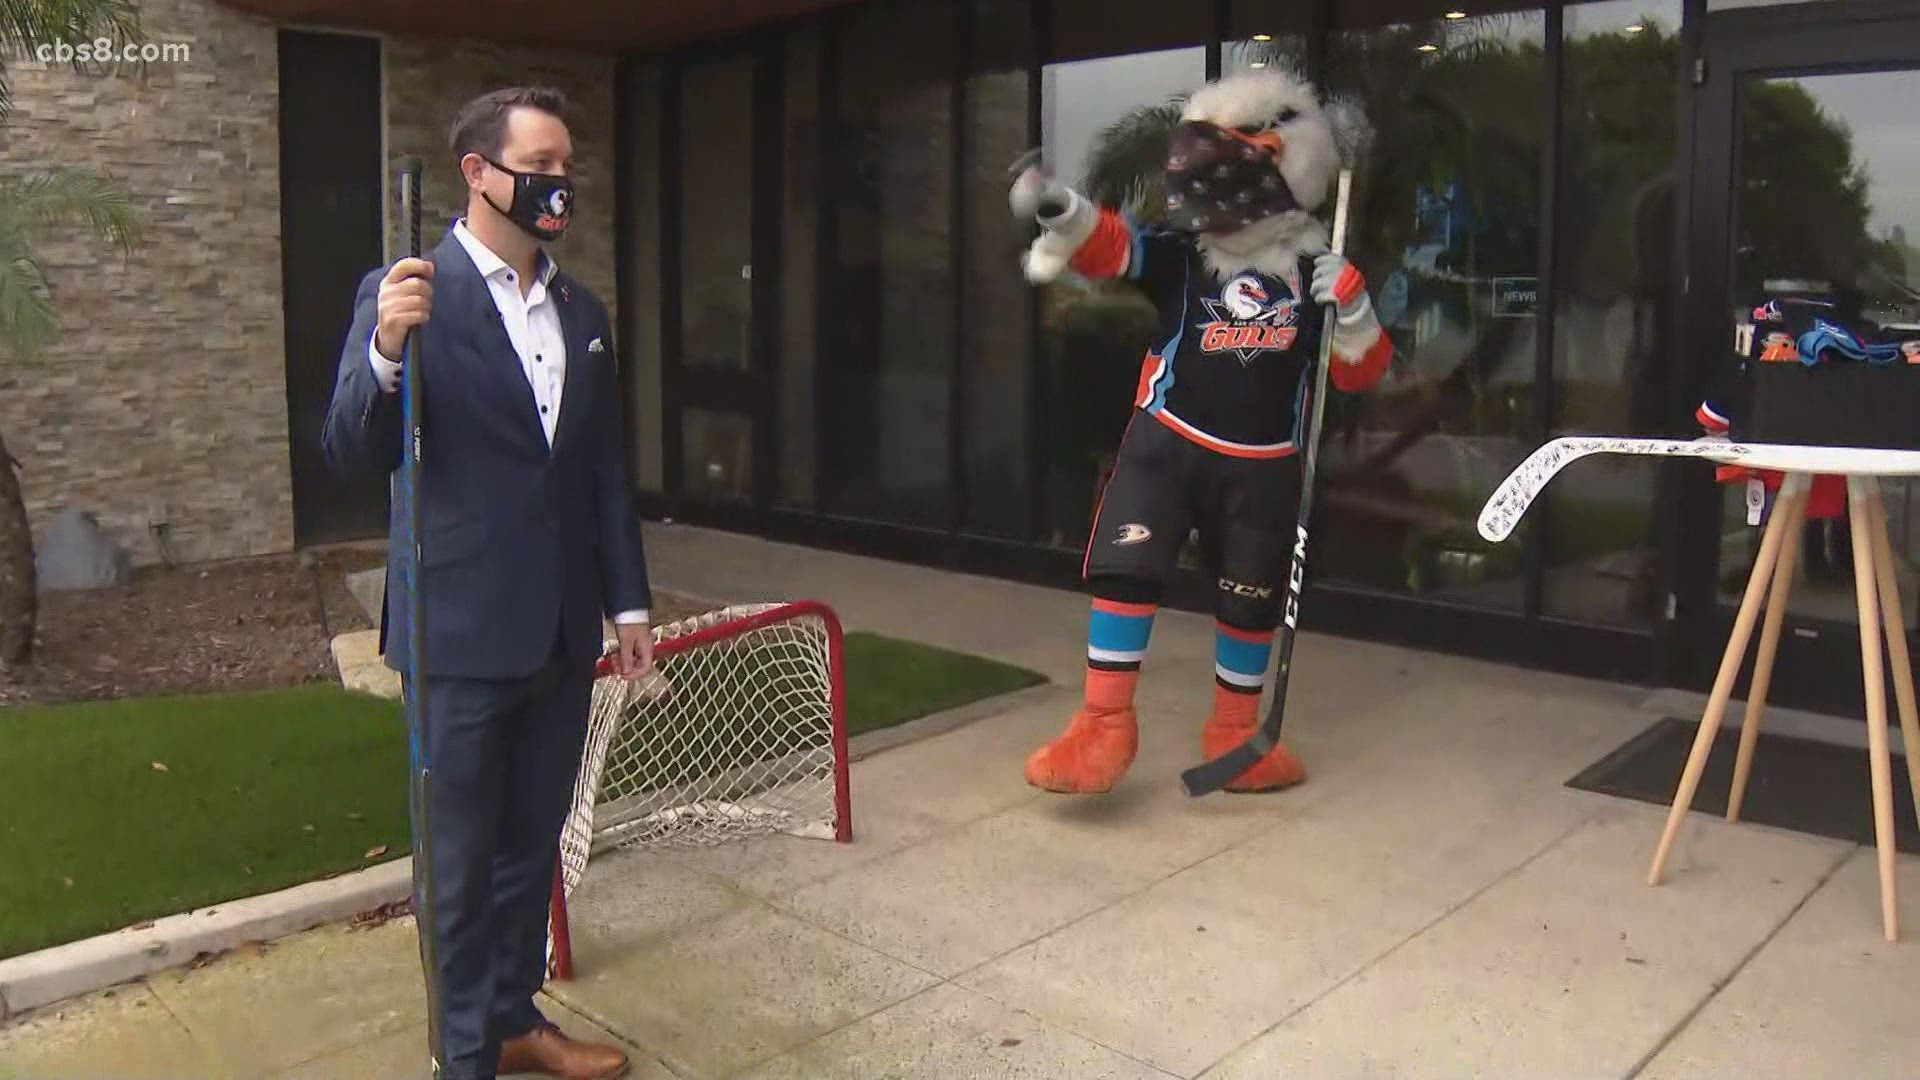 Matt Savant from the Gulls along with mascot Gulliver joined the show for some fun and to talk about Saturday night’s game against Tucson.